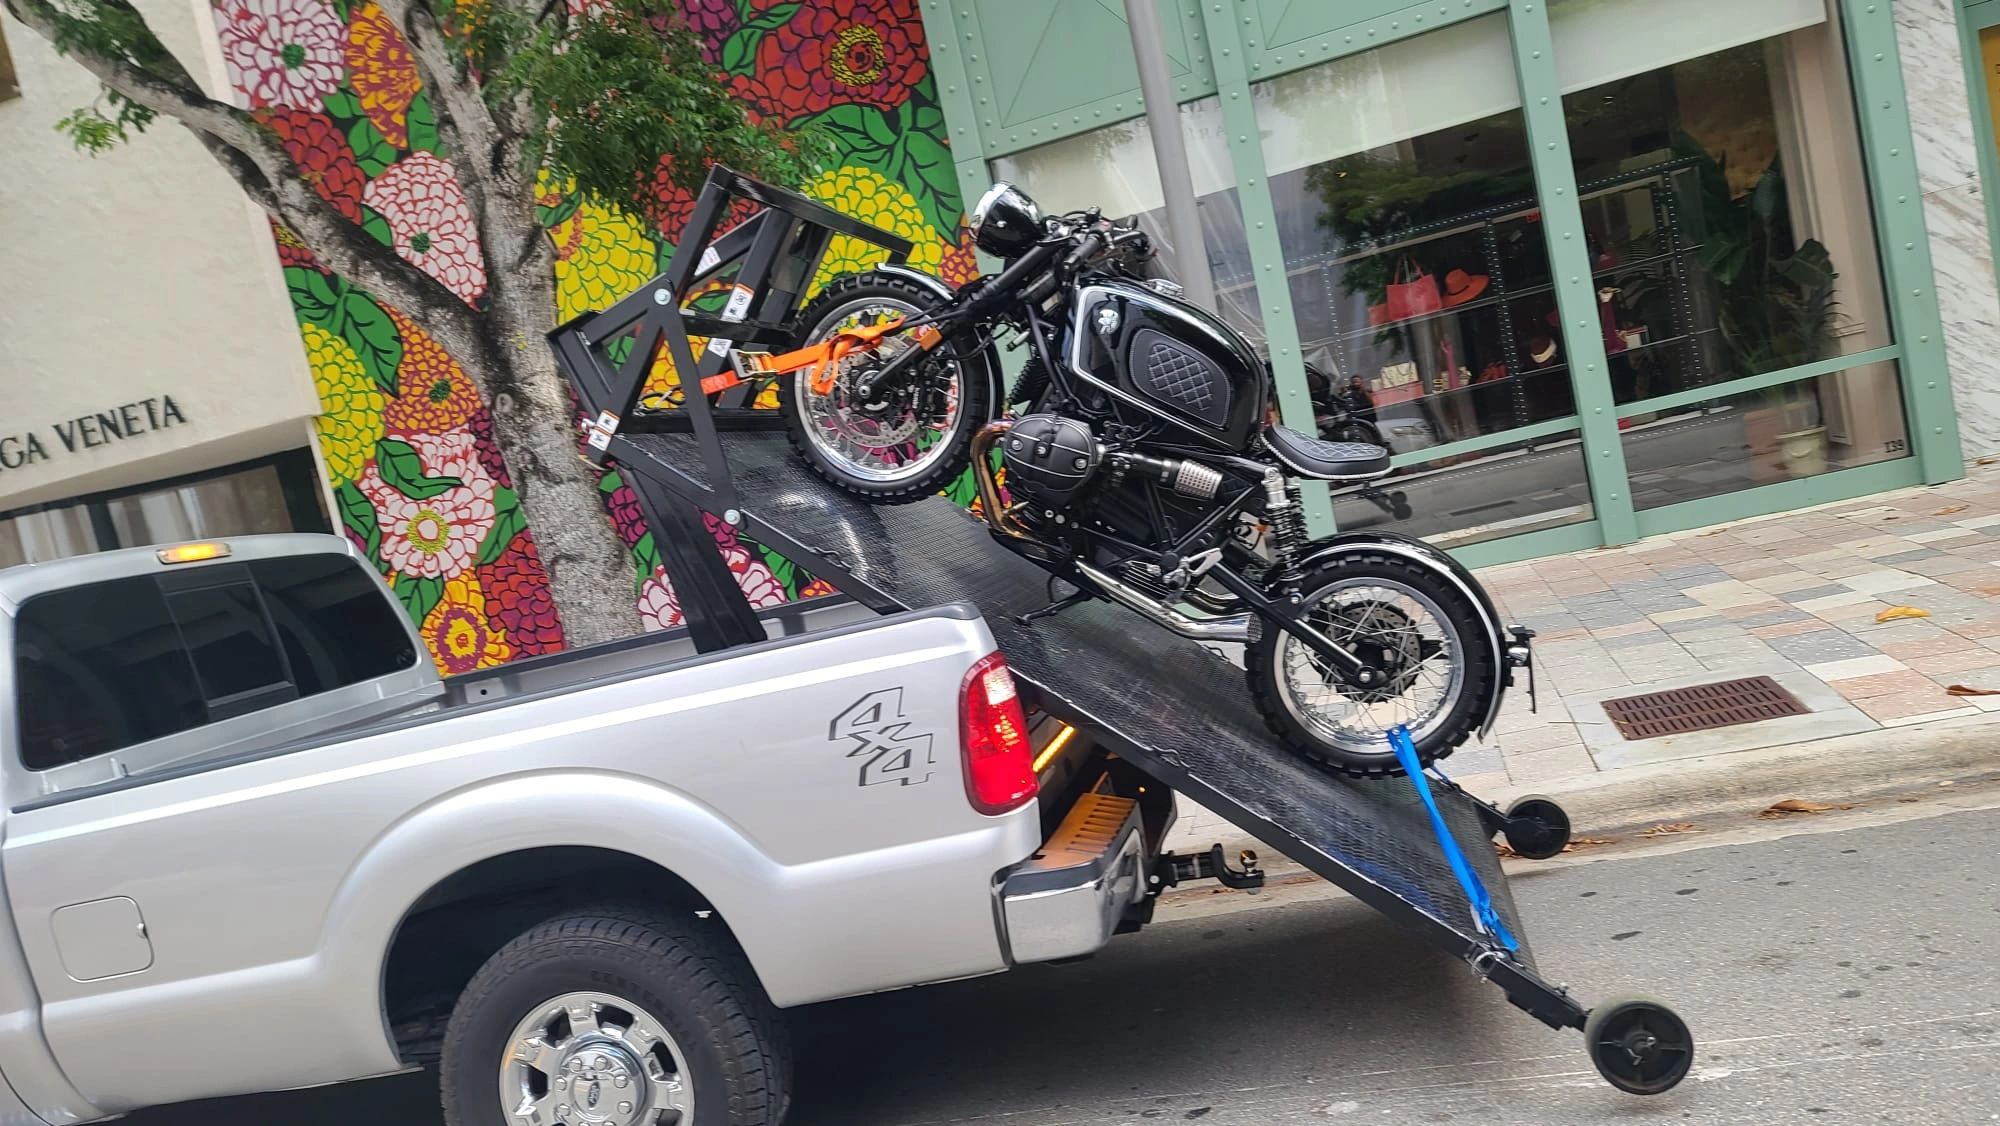 Motorcycle towing using a flatbed lift.